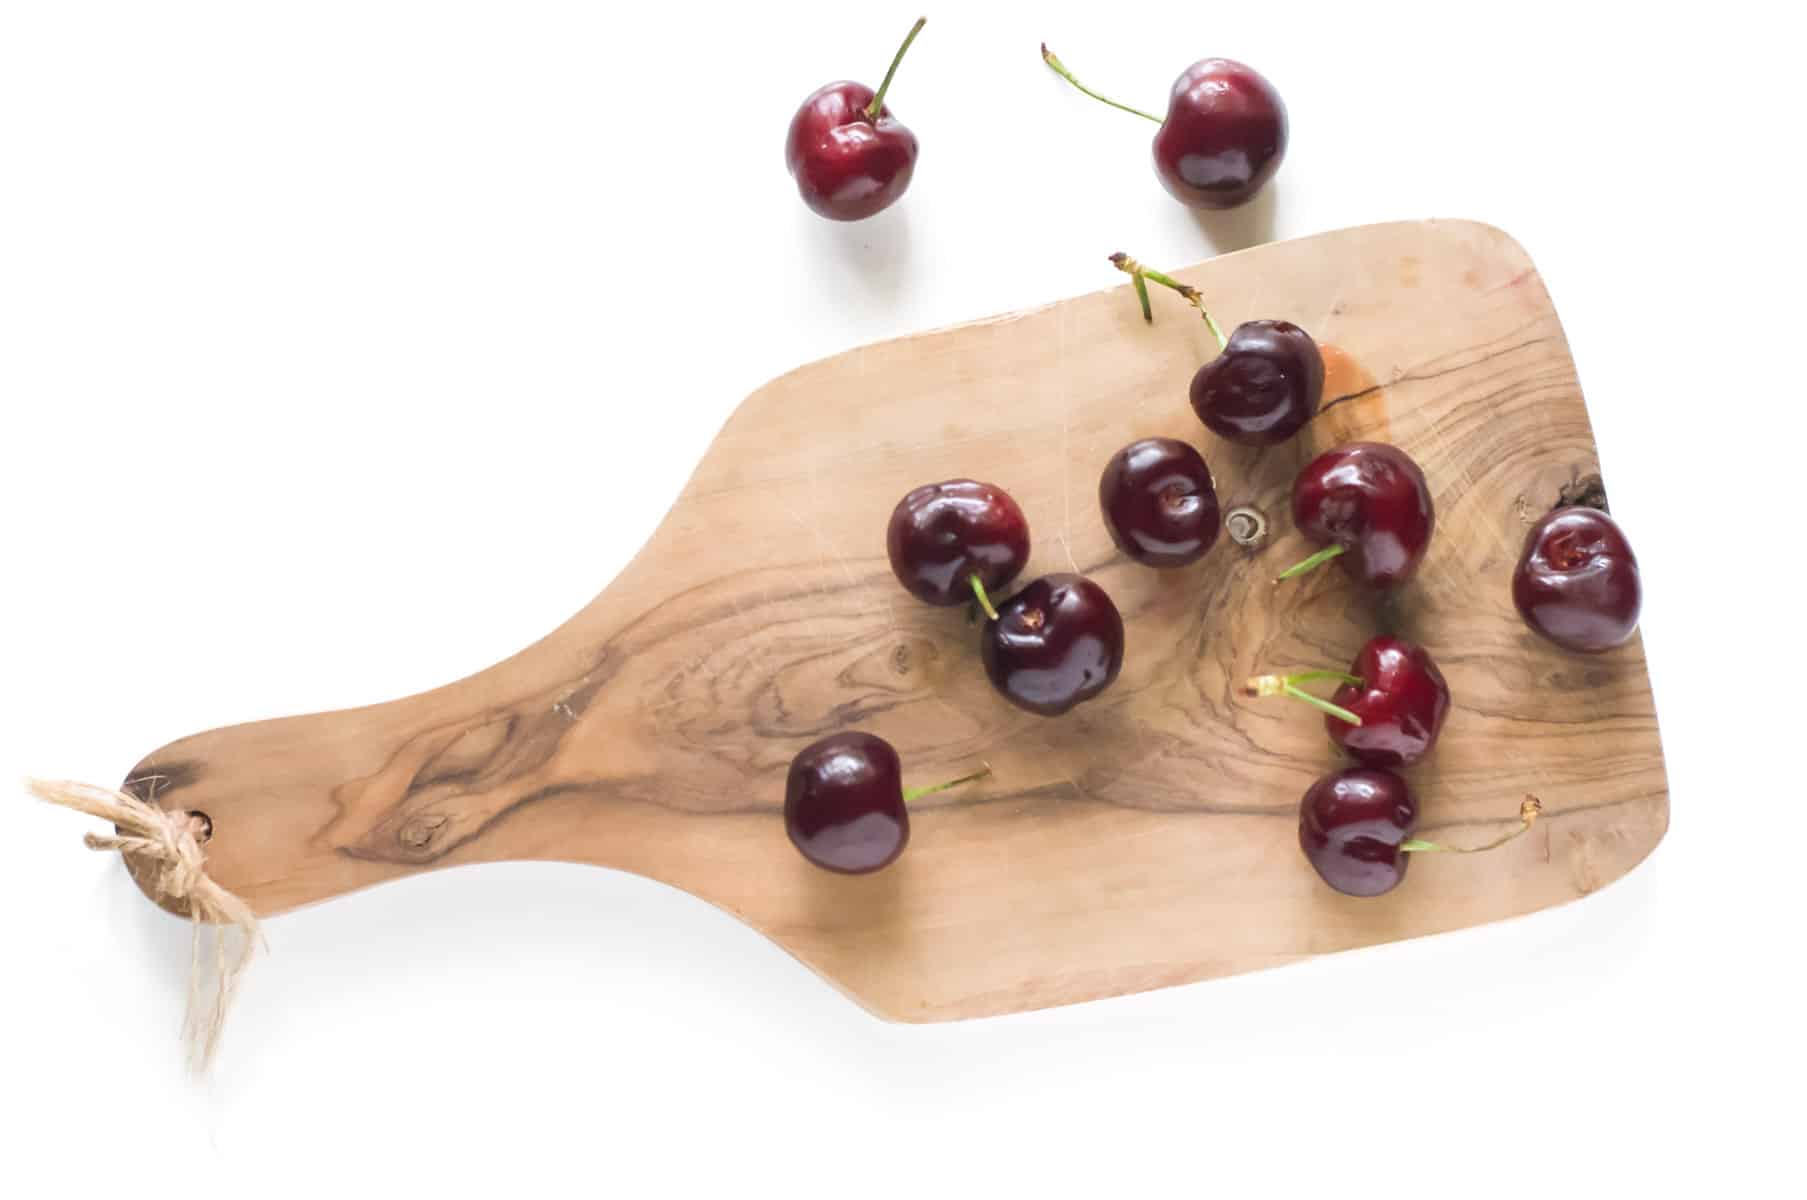 Several fresh cherries on a wooden cutting board.